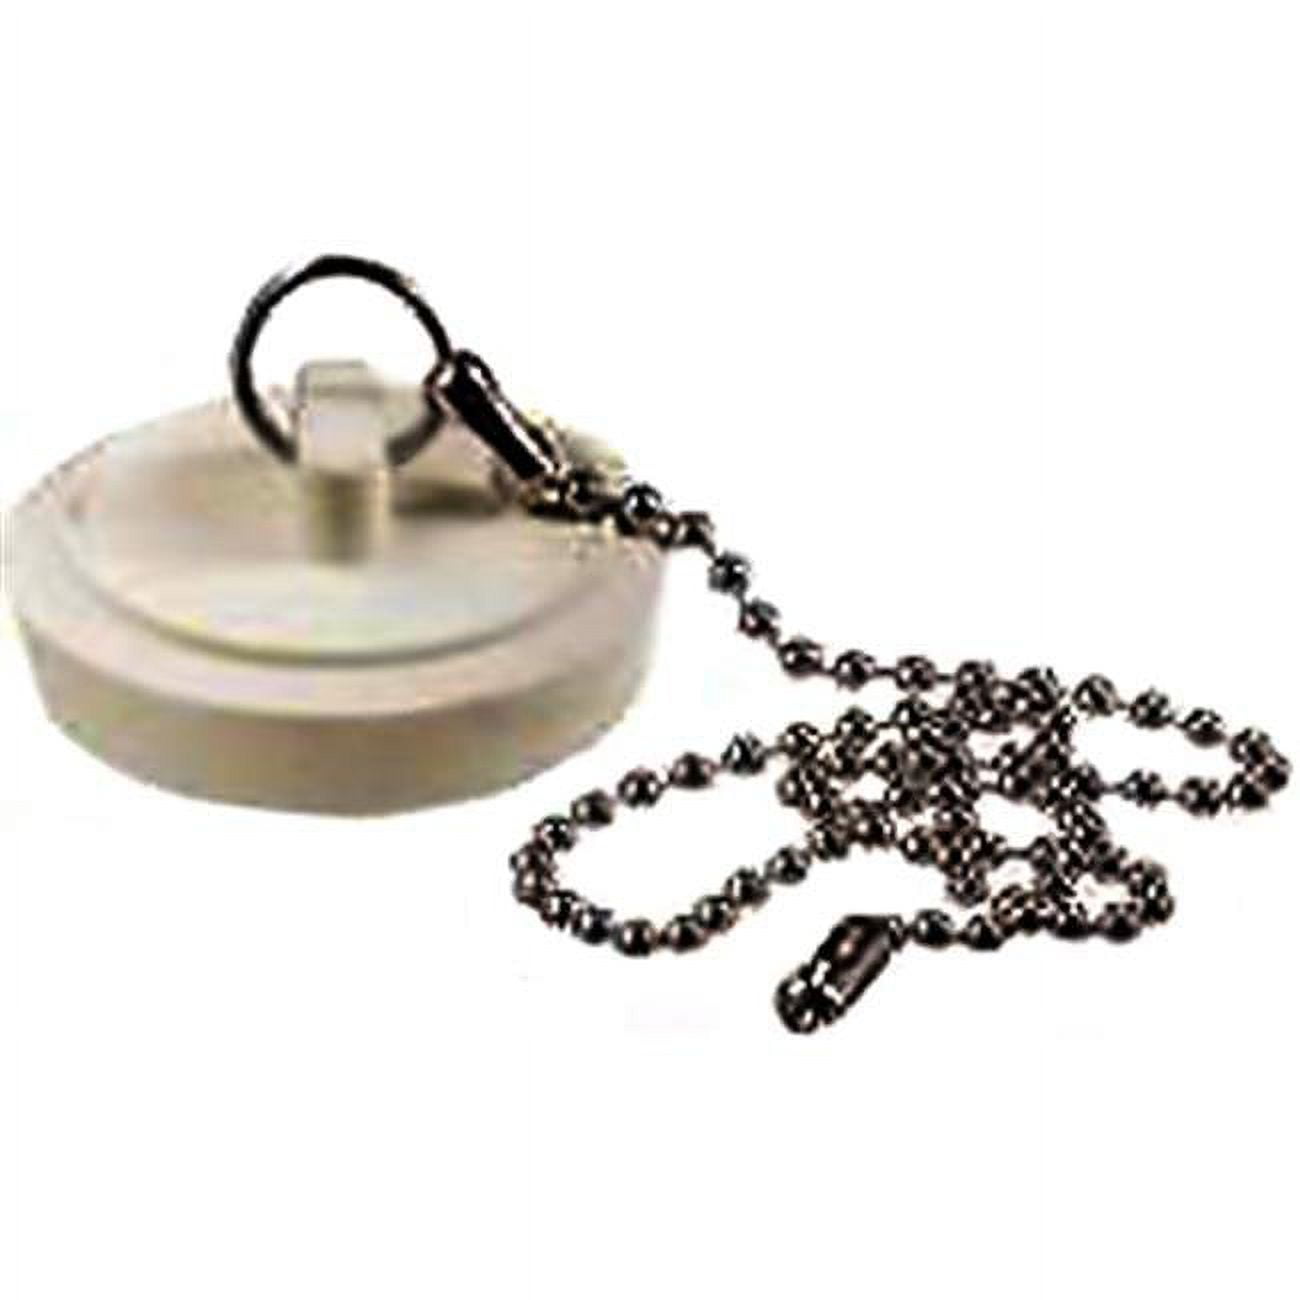 Pp820-43 1.5-2 In. Basin Stopper With Chain